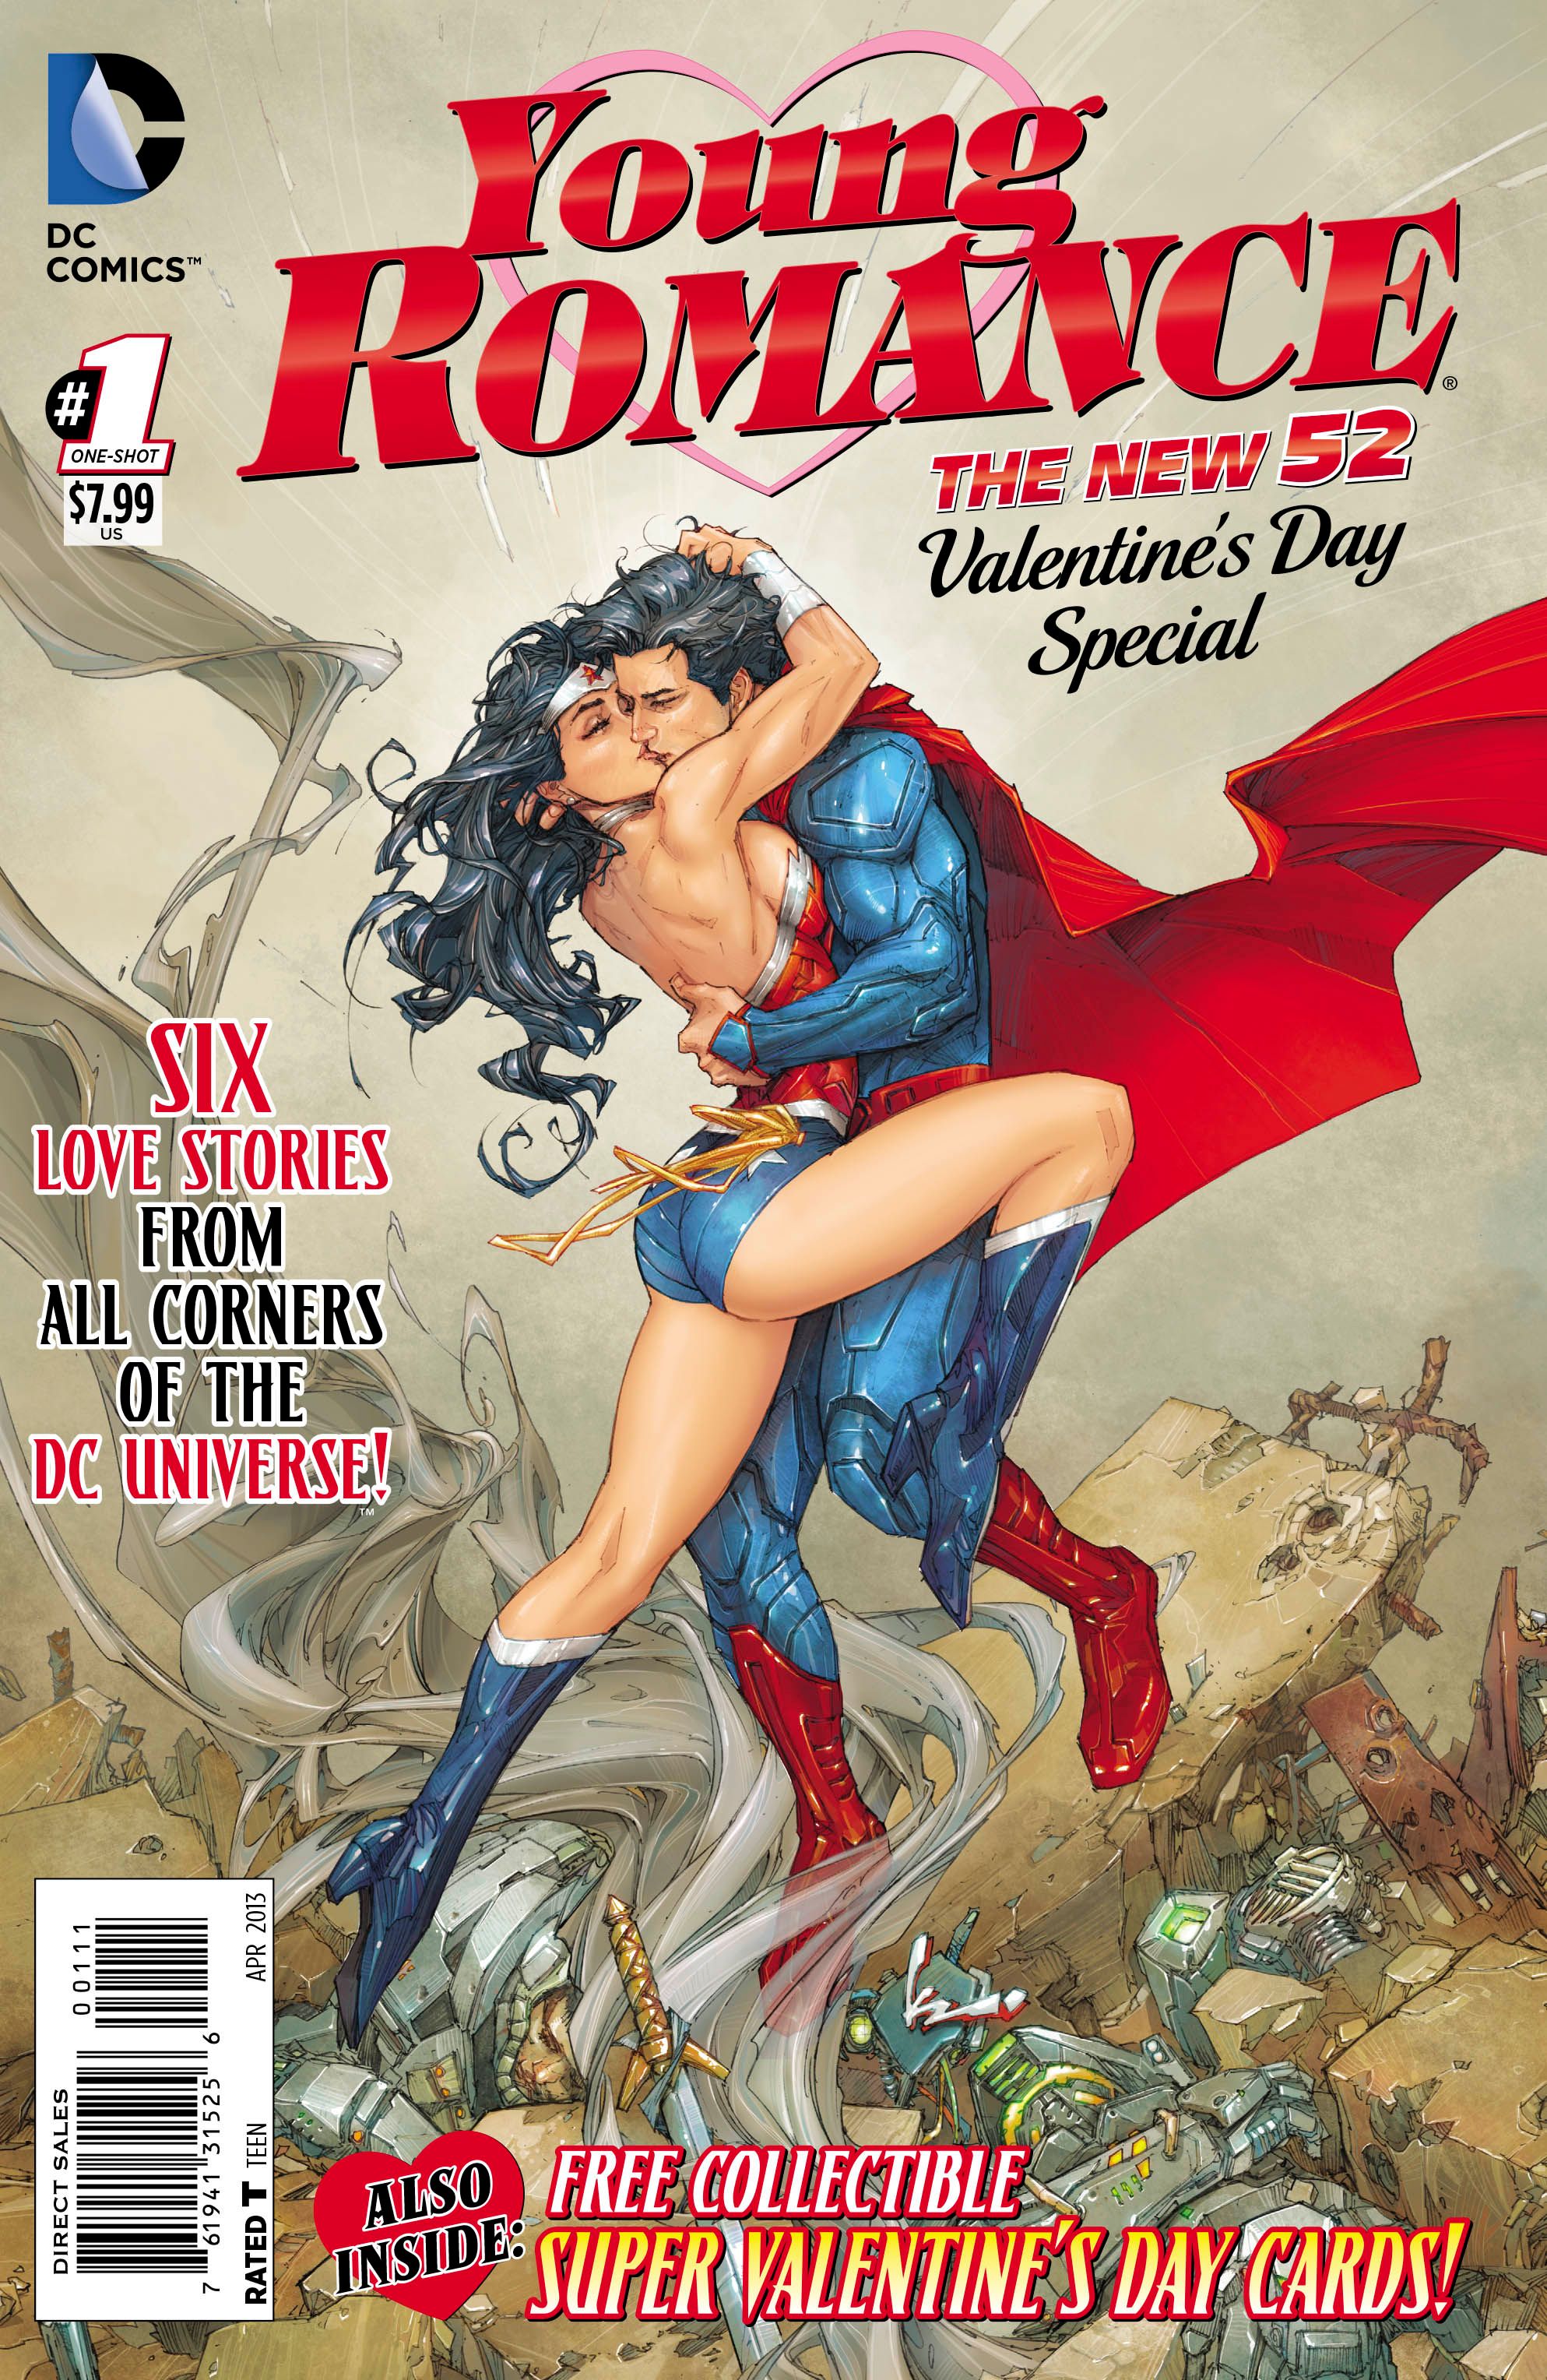 Image result for dc comics valentines day comic